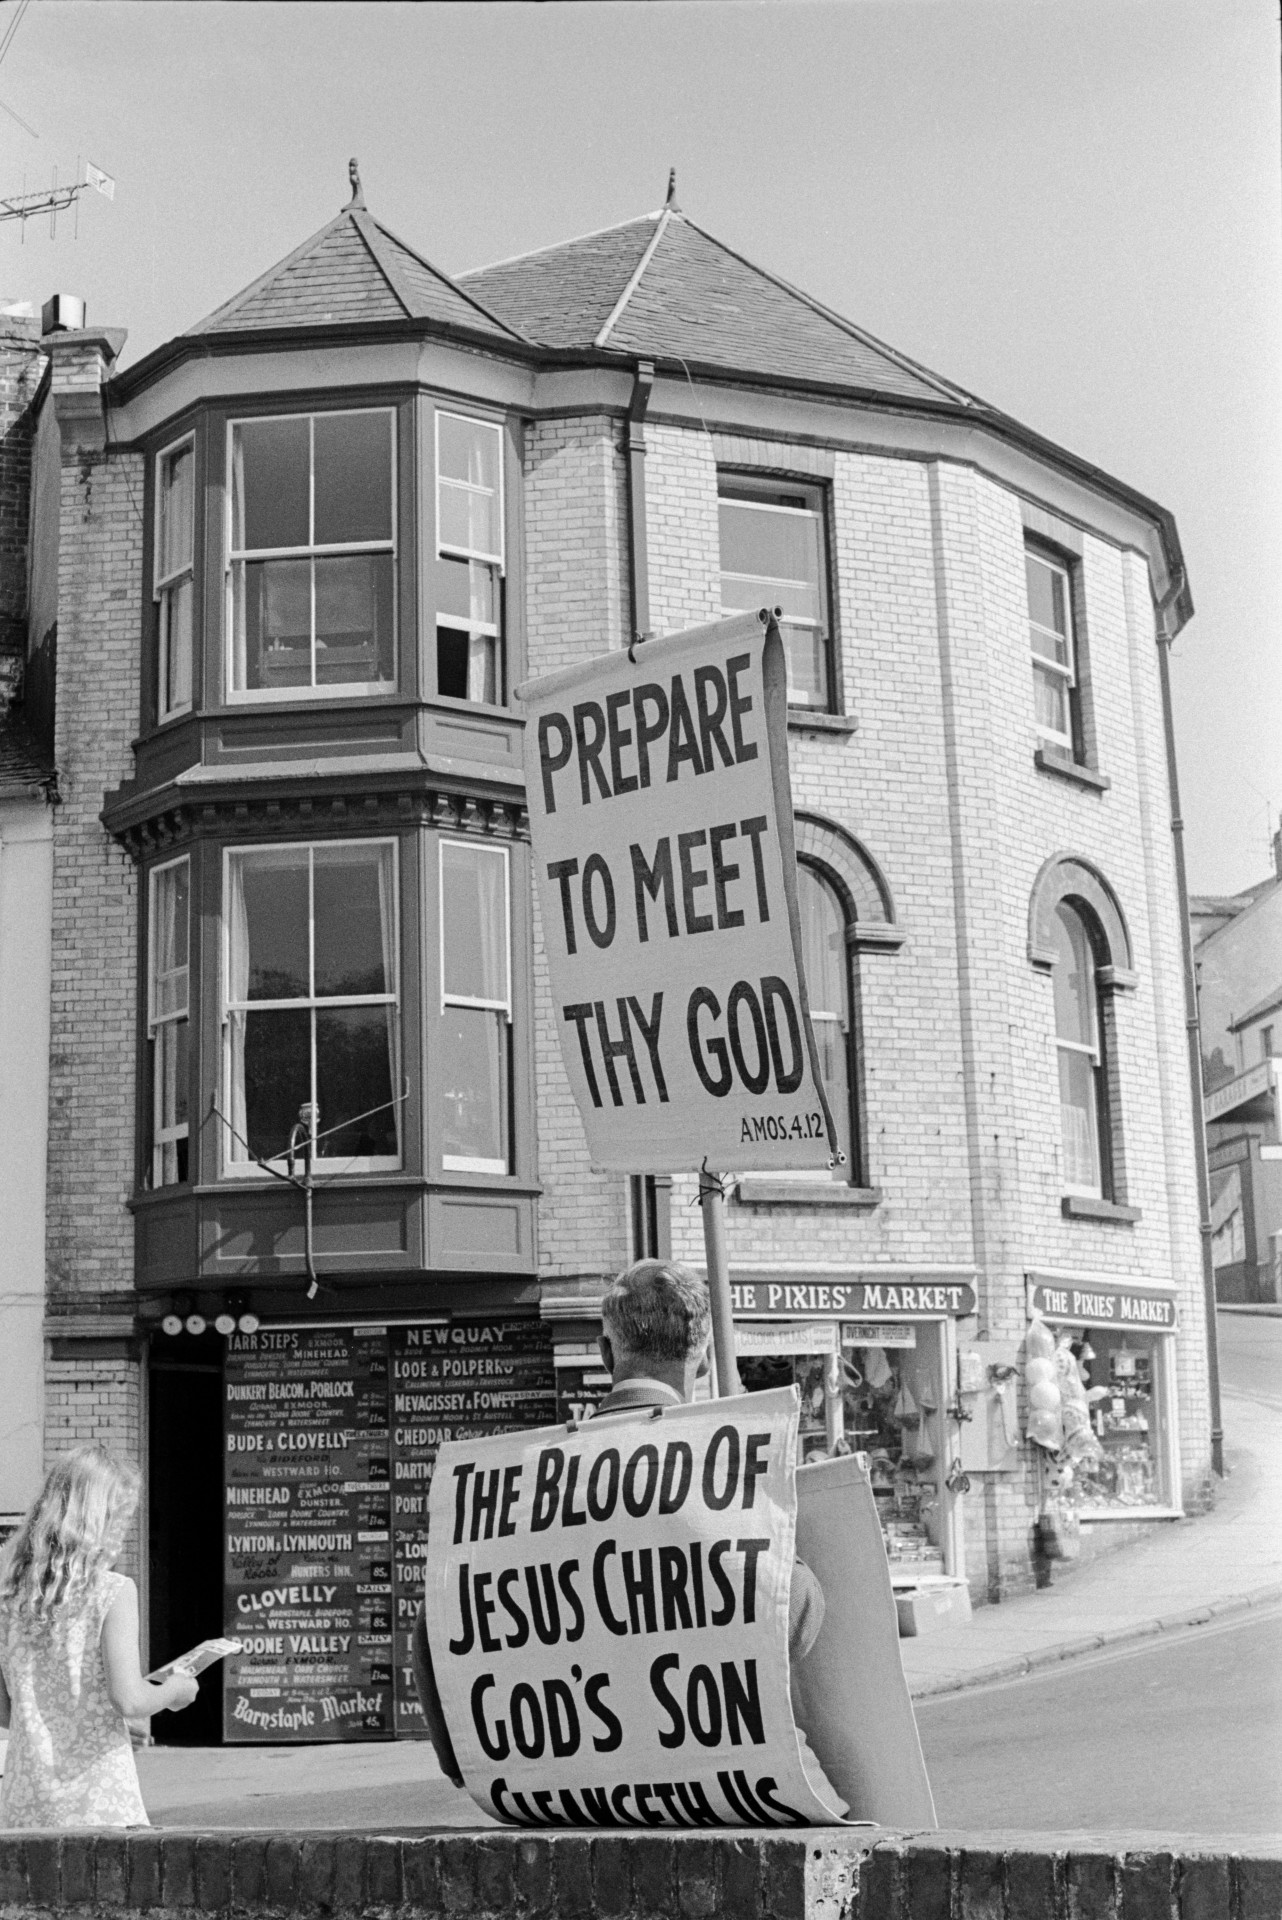 A man with religious placards sat on a wall in a street with shops, including The Pixie's Market shop, at Ilfracombe.